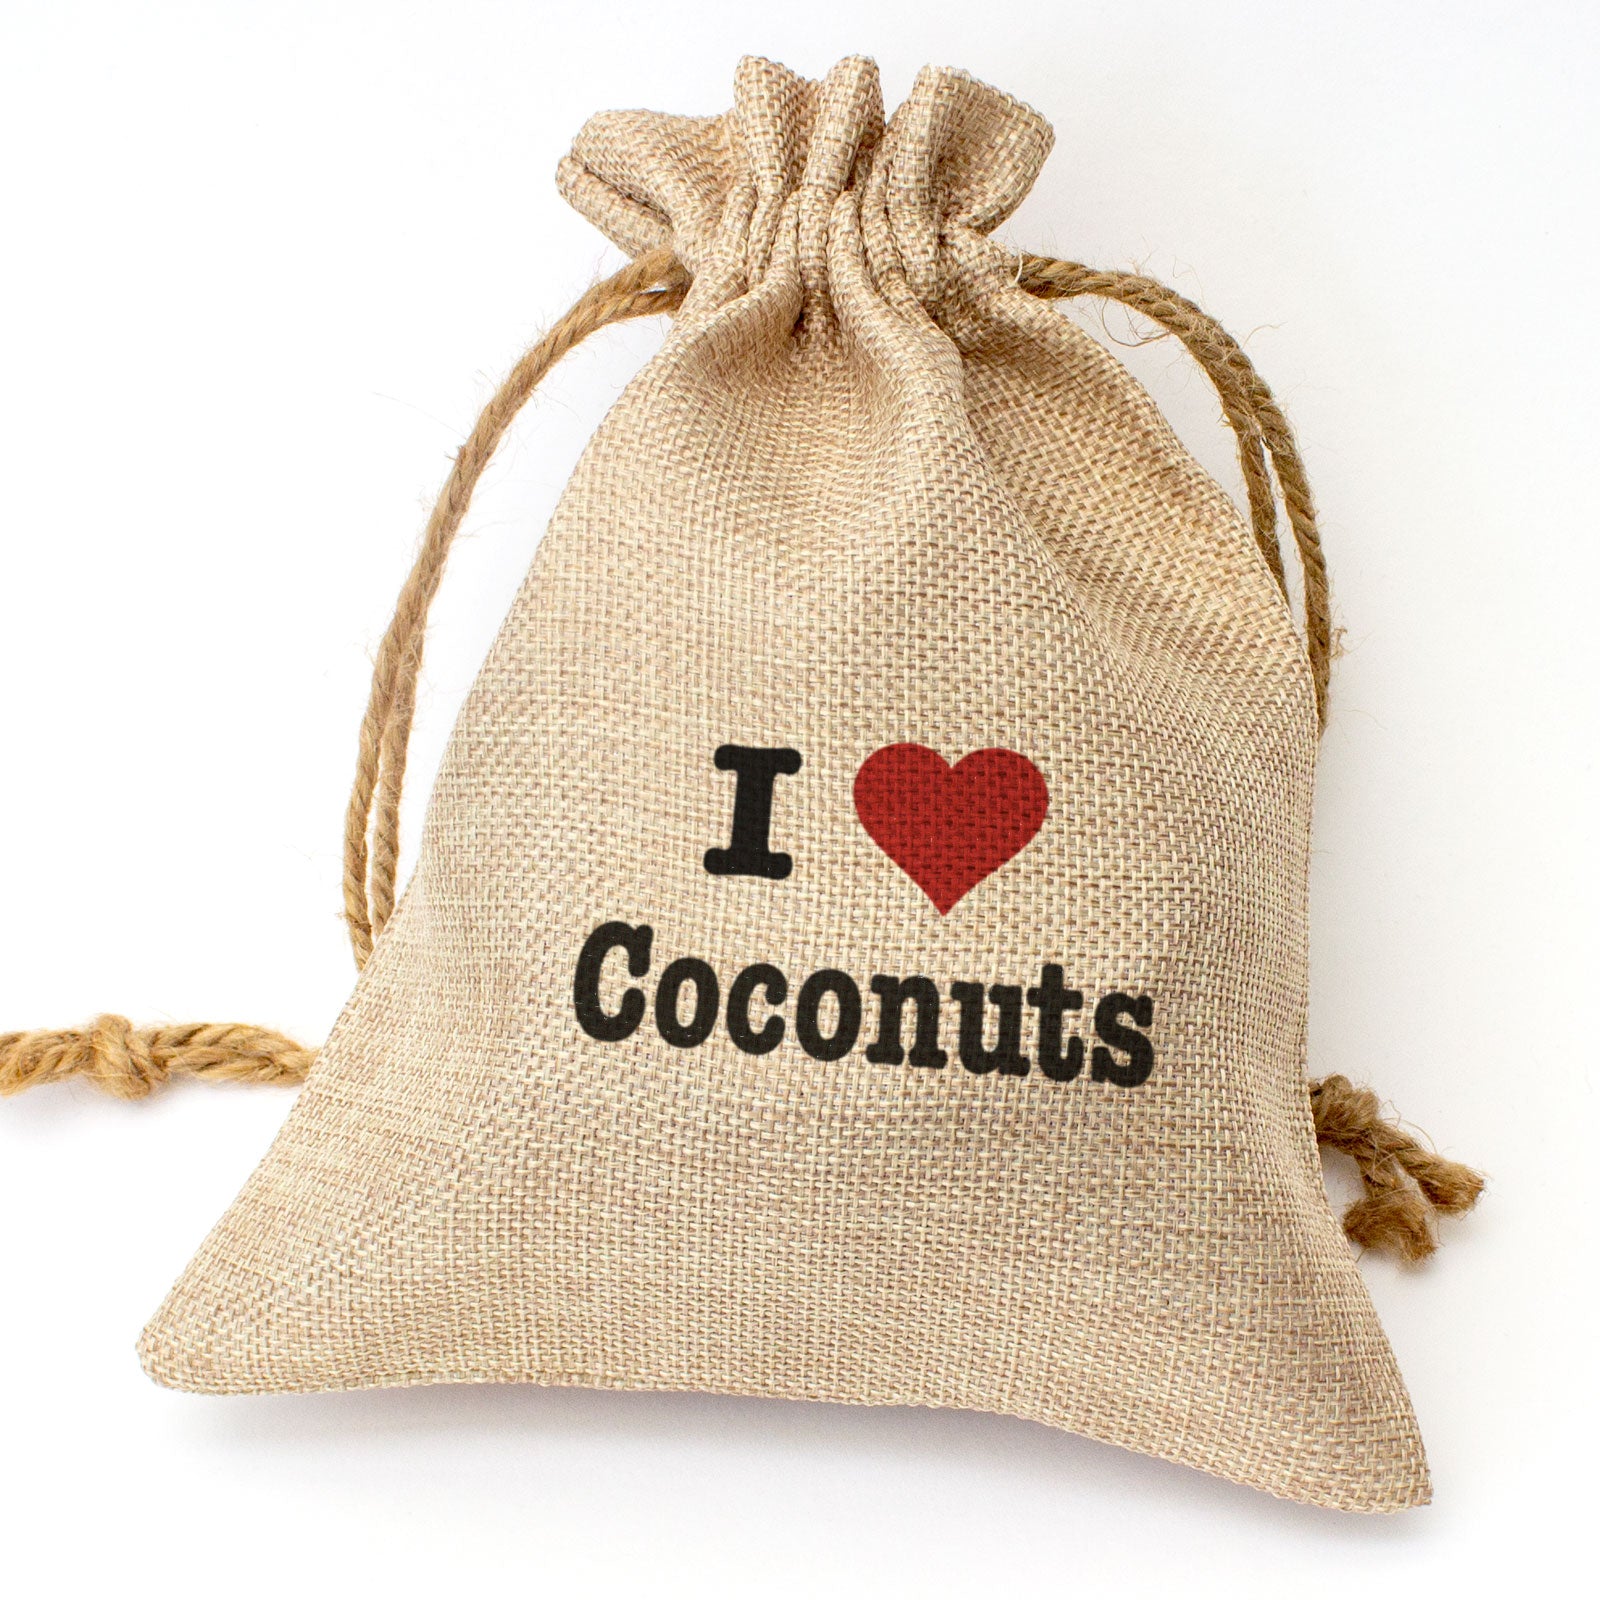 For the Love of Coconuts